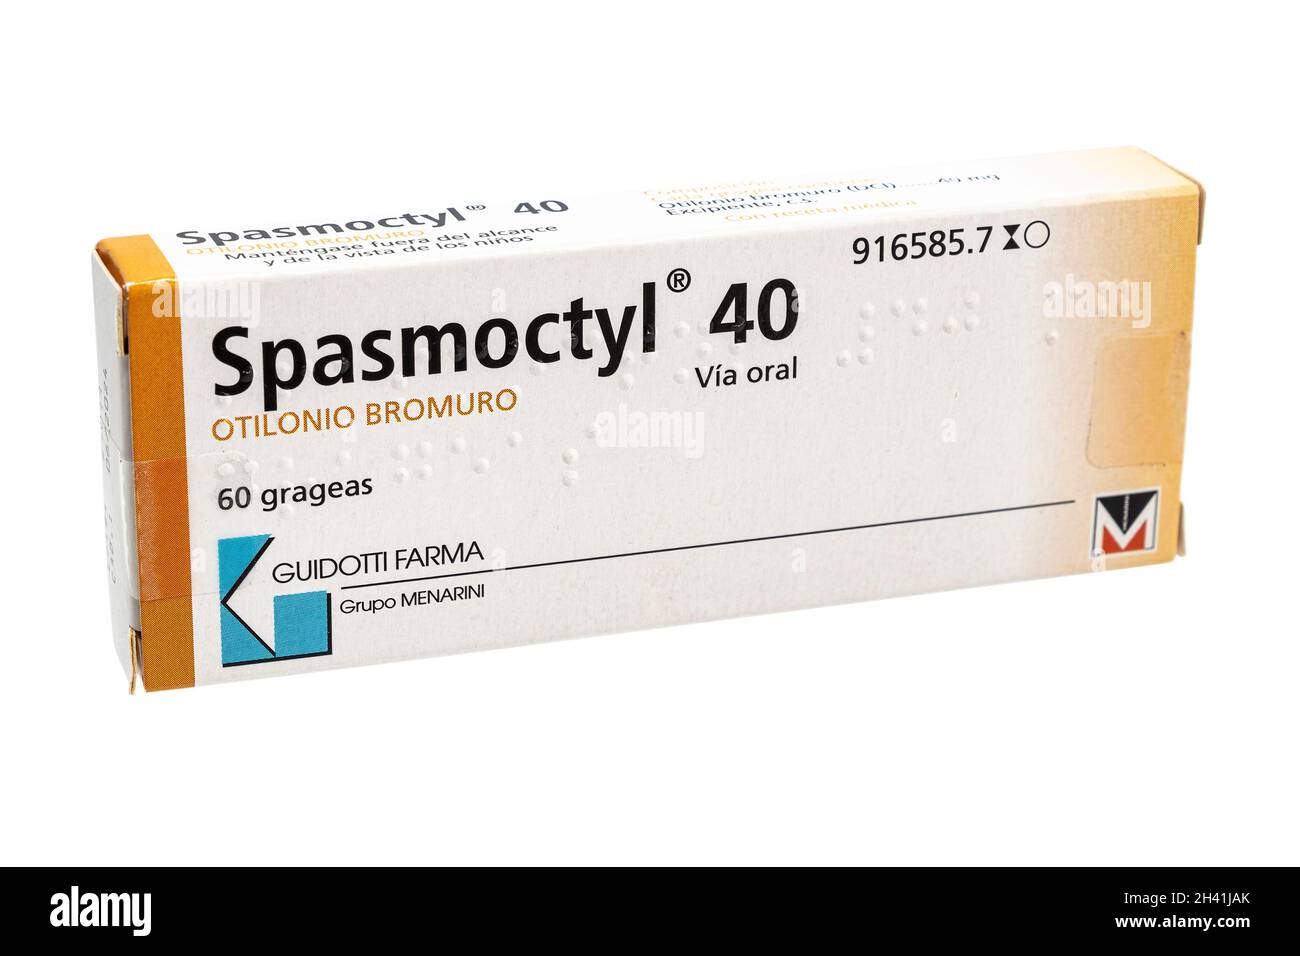 Huelva, Spain - October 29, 2021: Spanish box of SPASMOCTYL 40. Otilonium bromide works by reducing localized spasms in the digestive system at the le Stock Photo